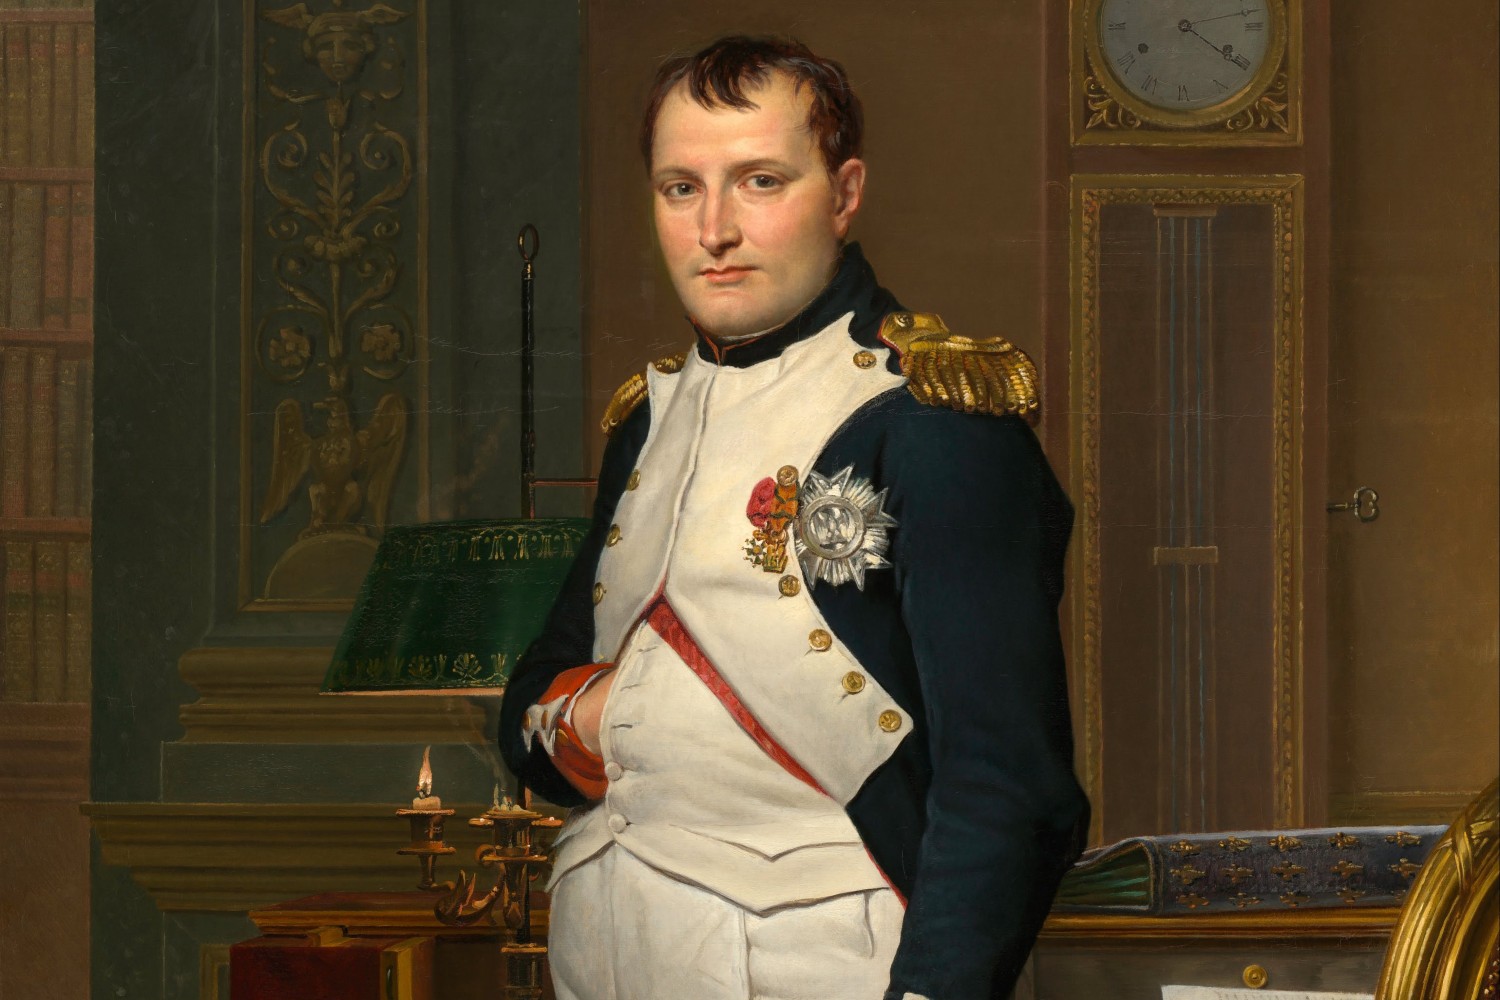 "The Emperor Napoleon in His Study at the Tuileries"